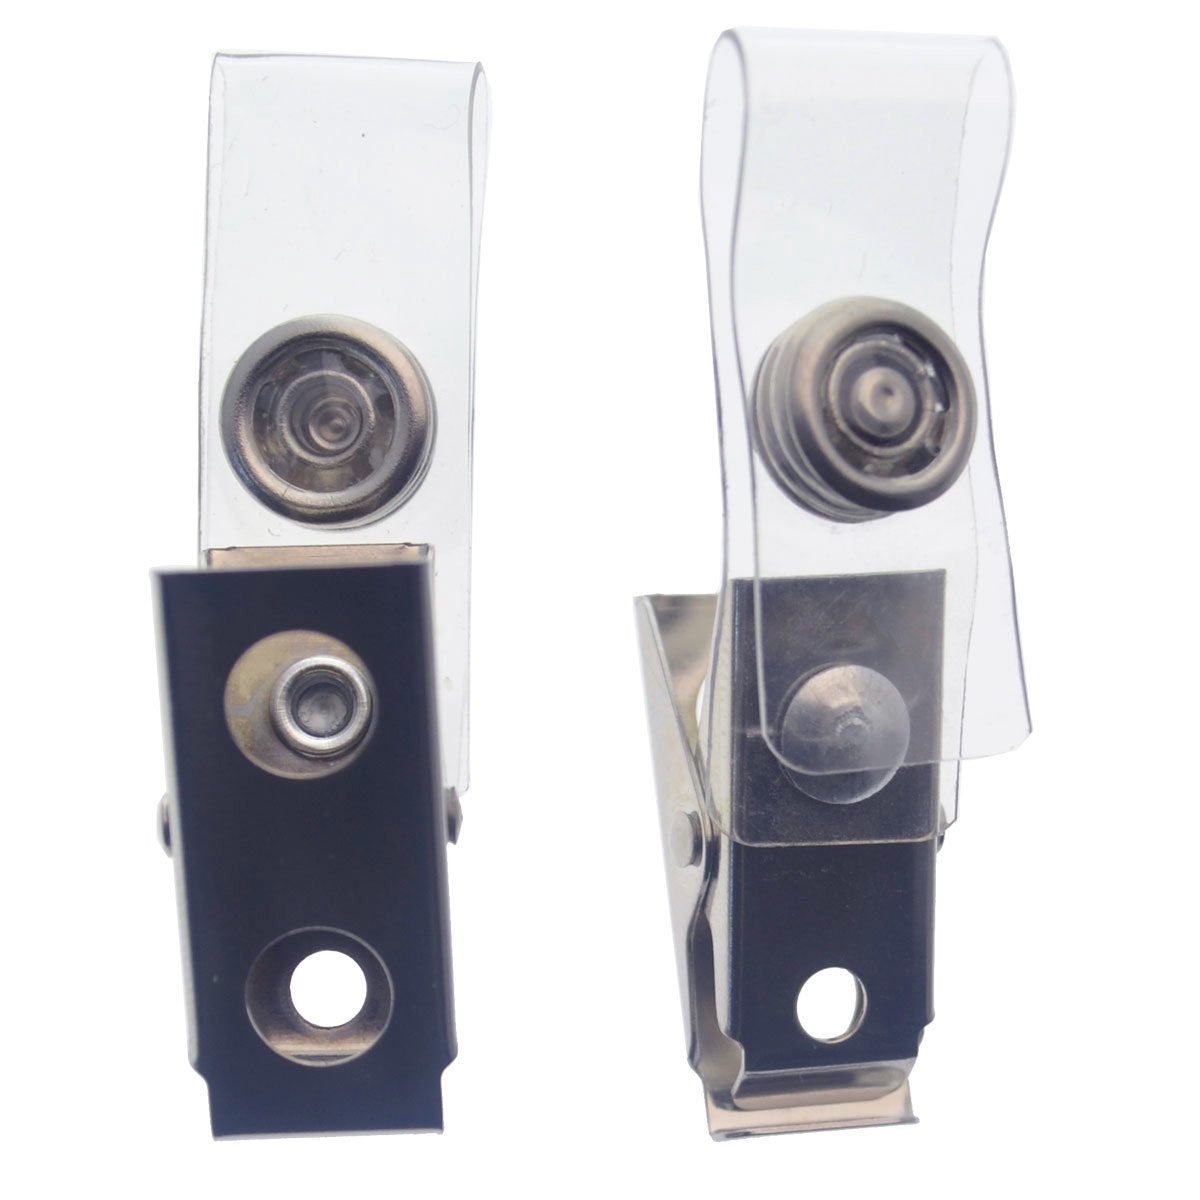 Two clear "ID Badge Strap Clips (Industry Standard Clip)" with metal spring clips, snap buttons, and durable vinyl straps. One clip is presented from the front, and the other from the back.